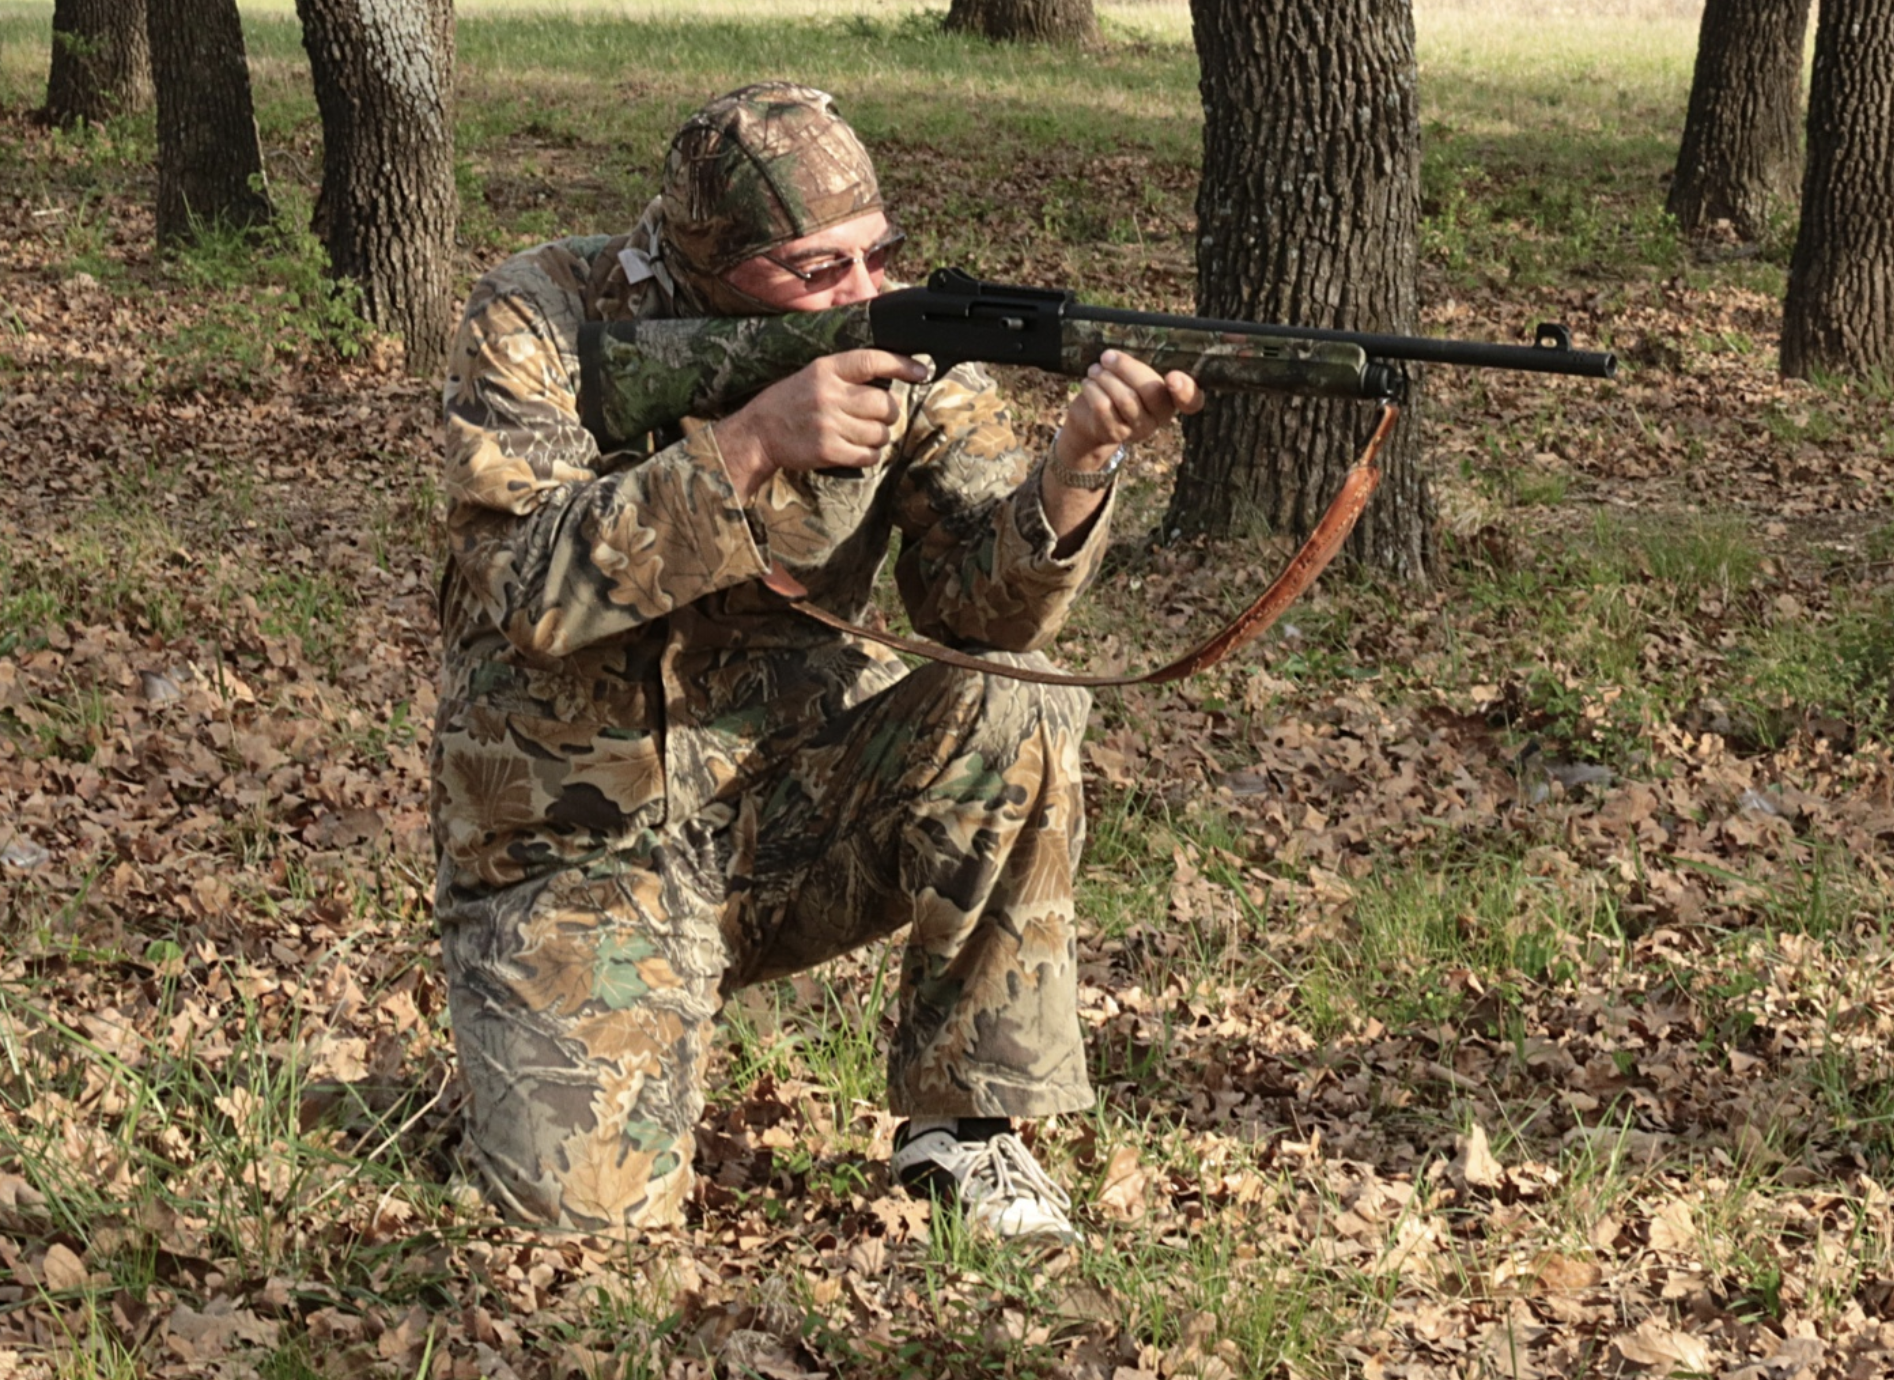 A man dressed in camouflage is aiming his shotgun as he is hunting in the woods.